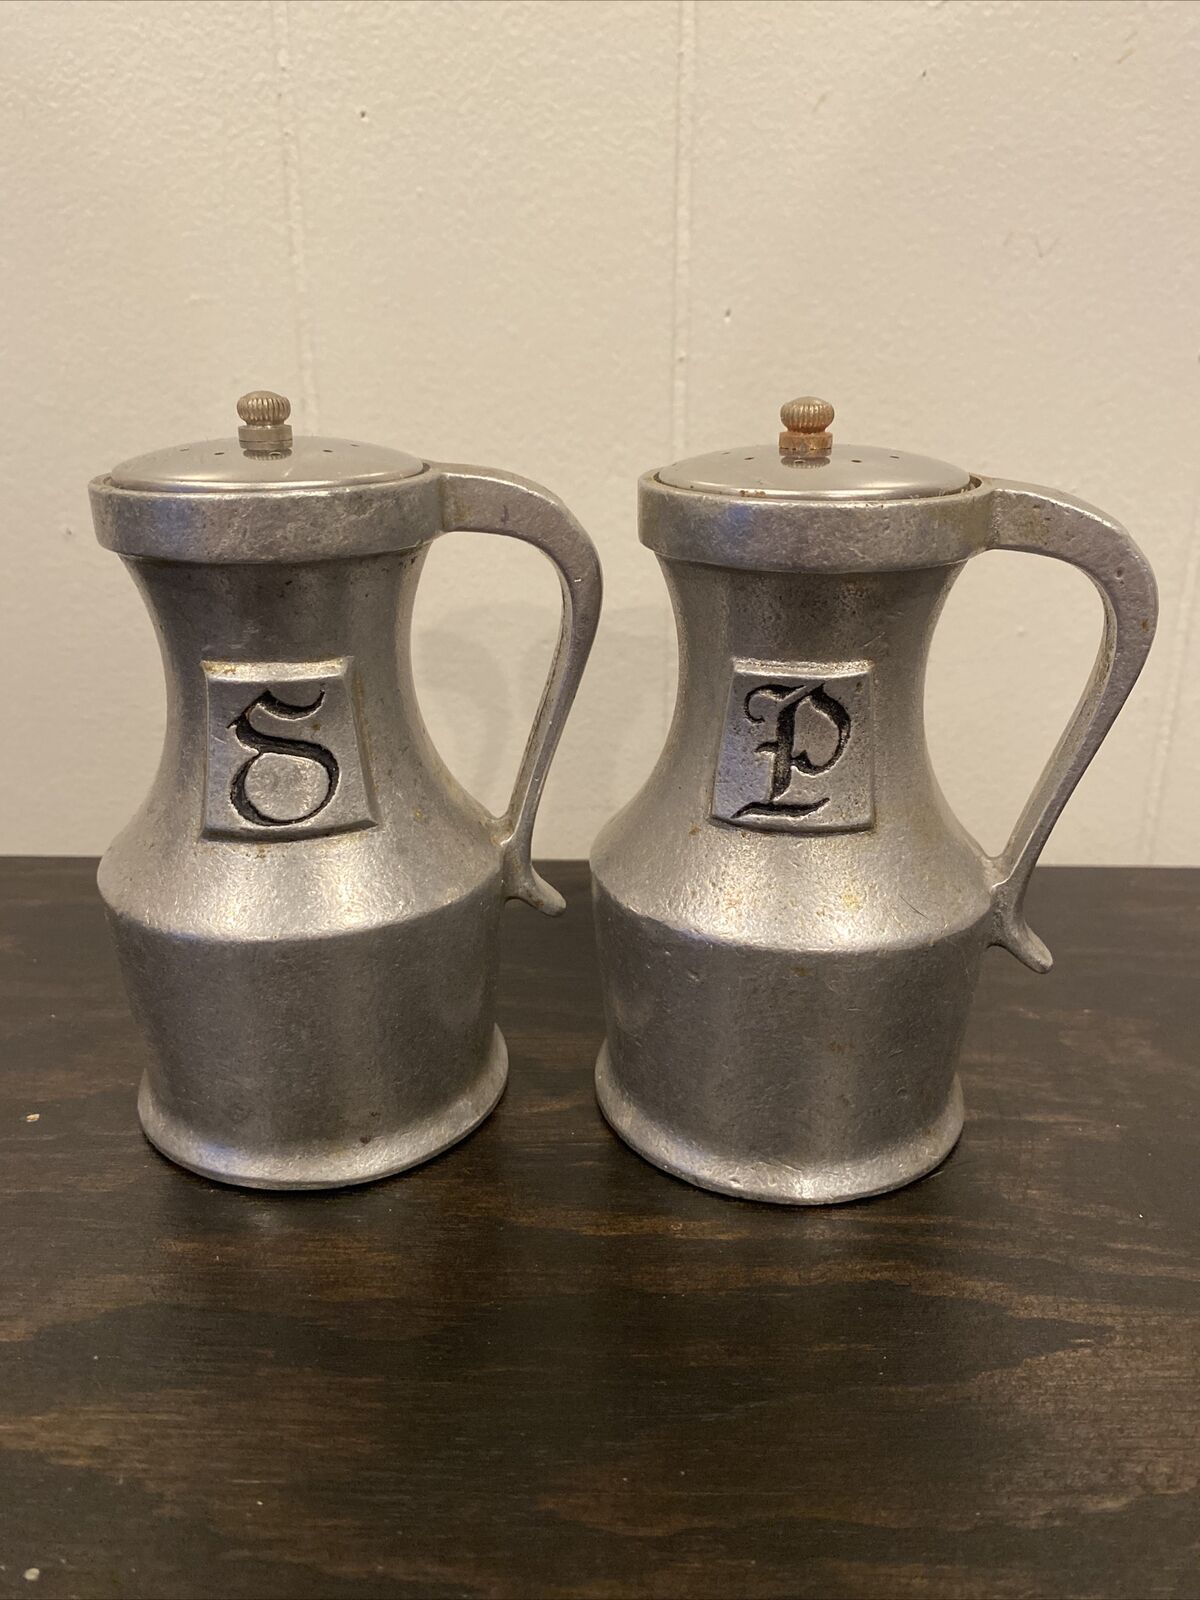 Wilton RWP Pewter Plough Colonial Salt and Pepper Shaker Columbia PA 